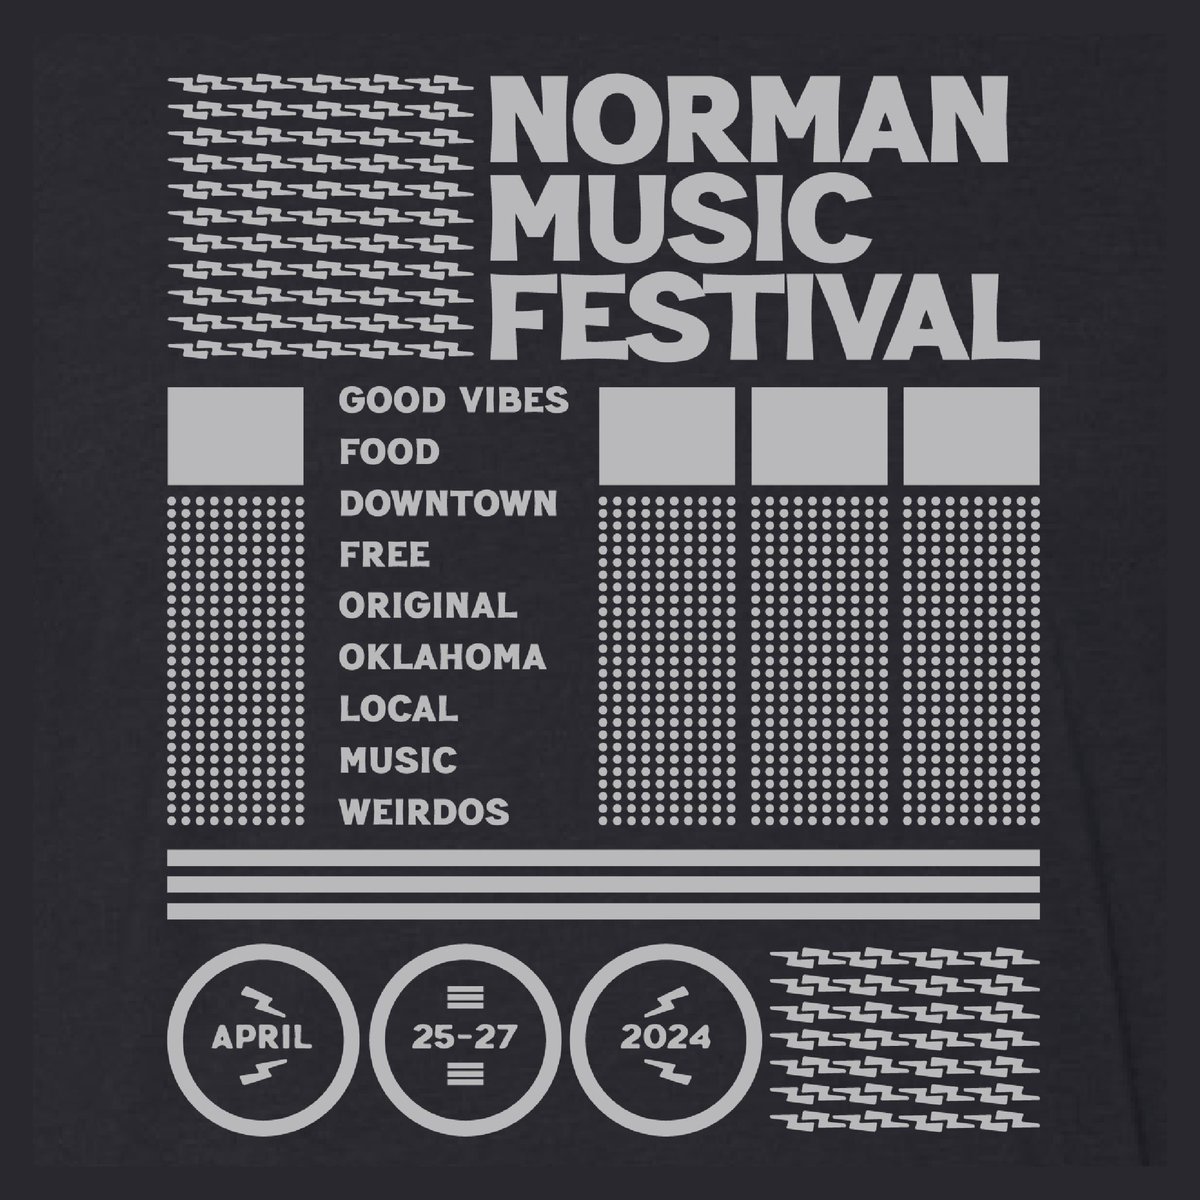 NMF shirts PREORDER! (you only have until Sunday…like this Sunday…) PREORDER HERE: oscillator-art.com/norman-music-f… We’ll have other designs available, but you’ll have to wait until the party to get those. 👕💛: @abbie_sears 👕🖤: @CreativeGiles #NMF4EVER